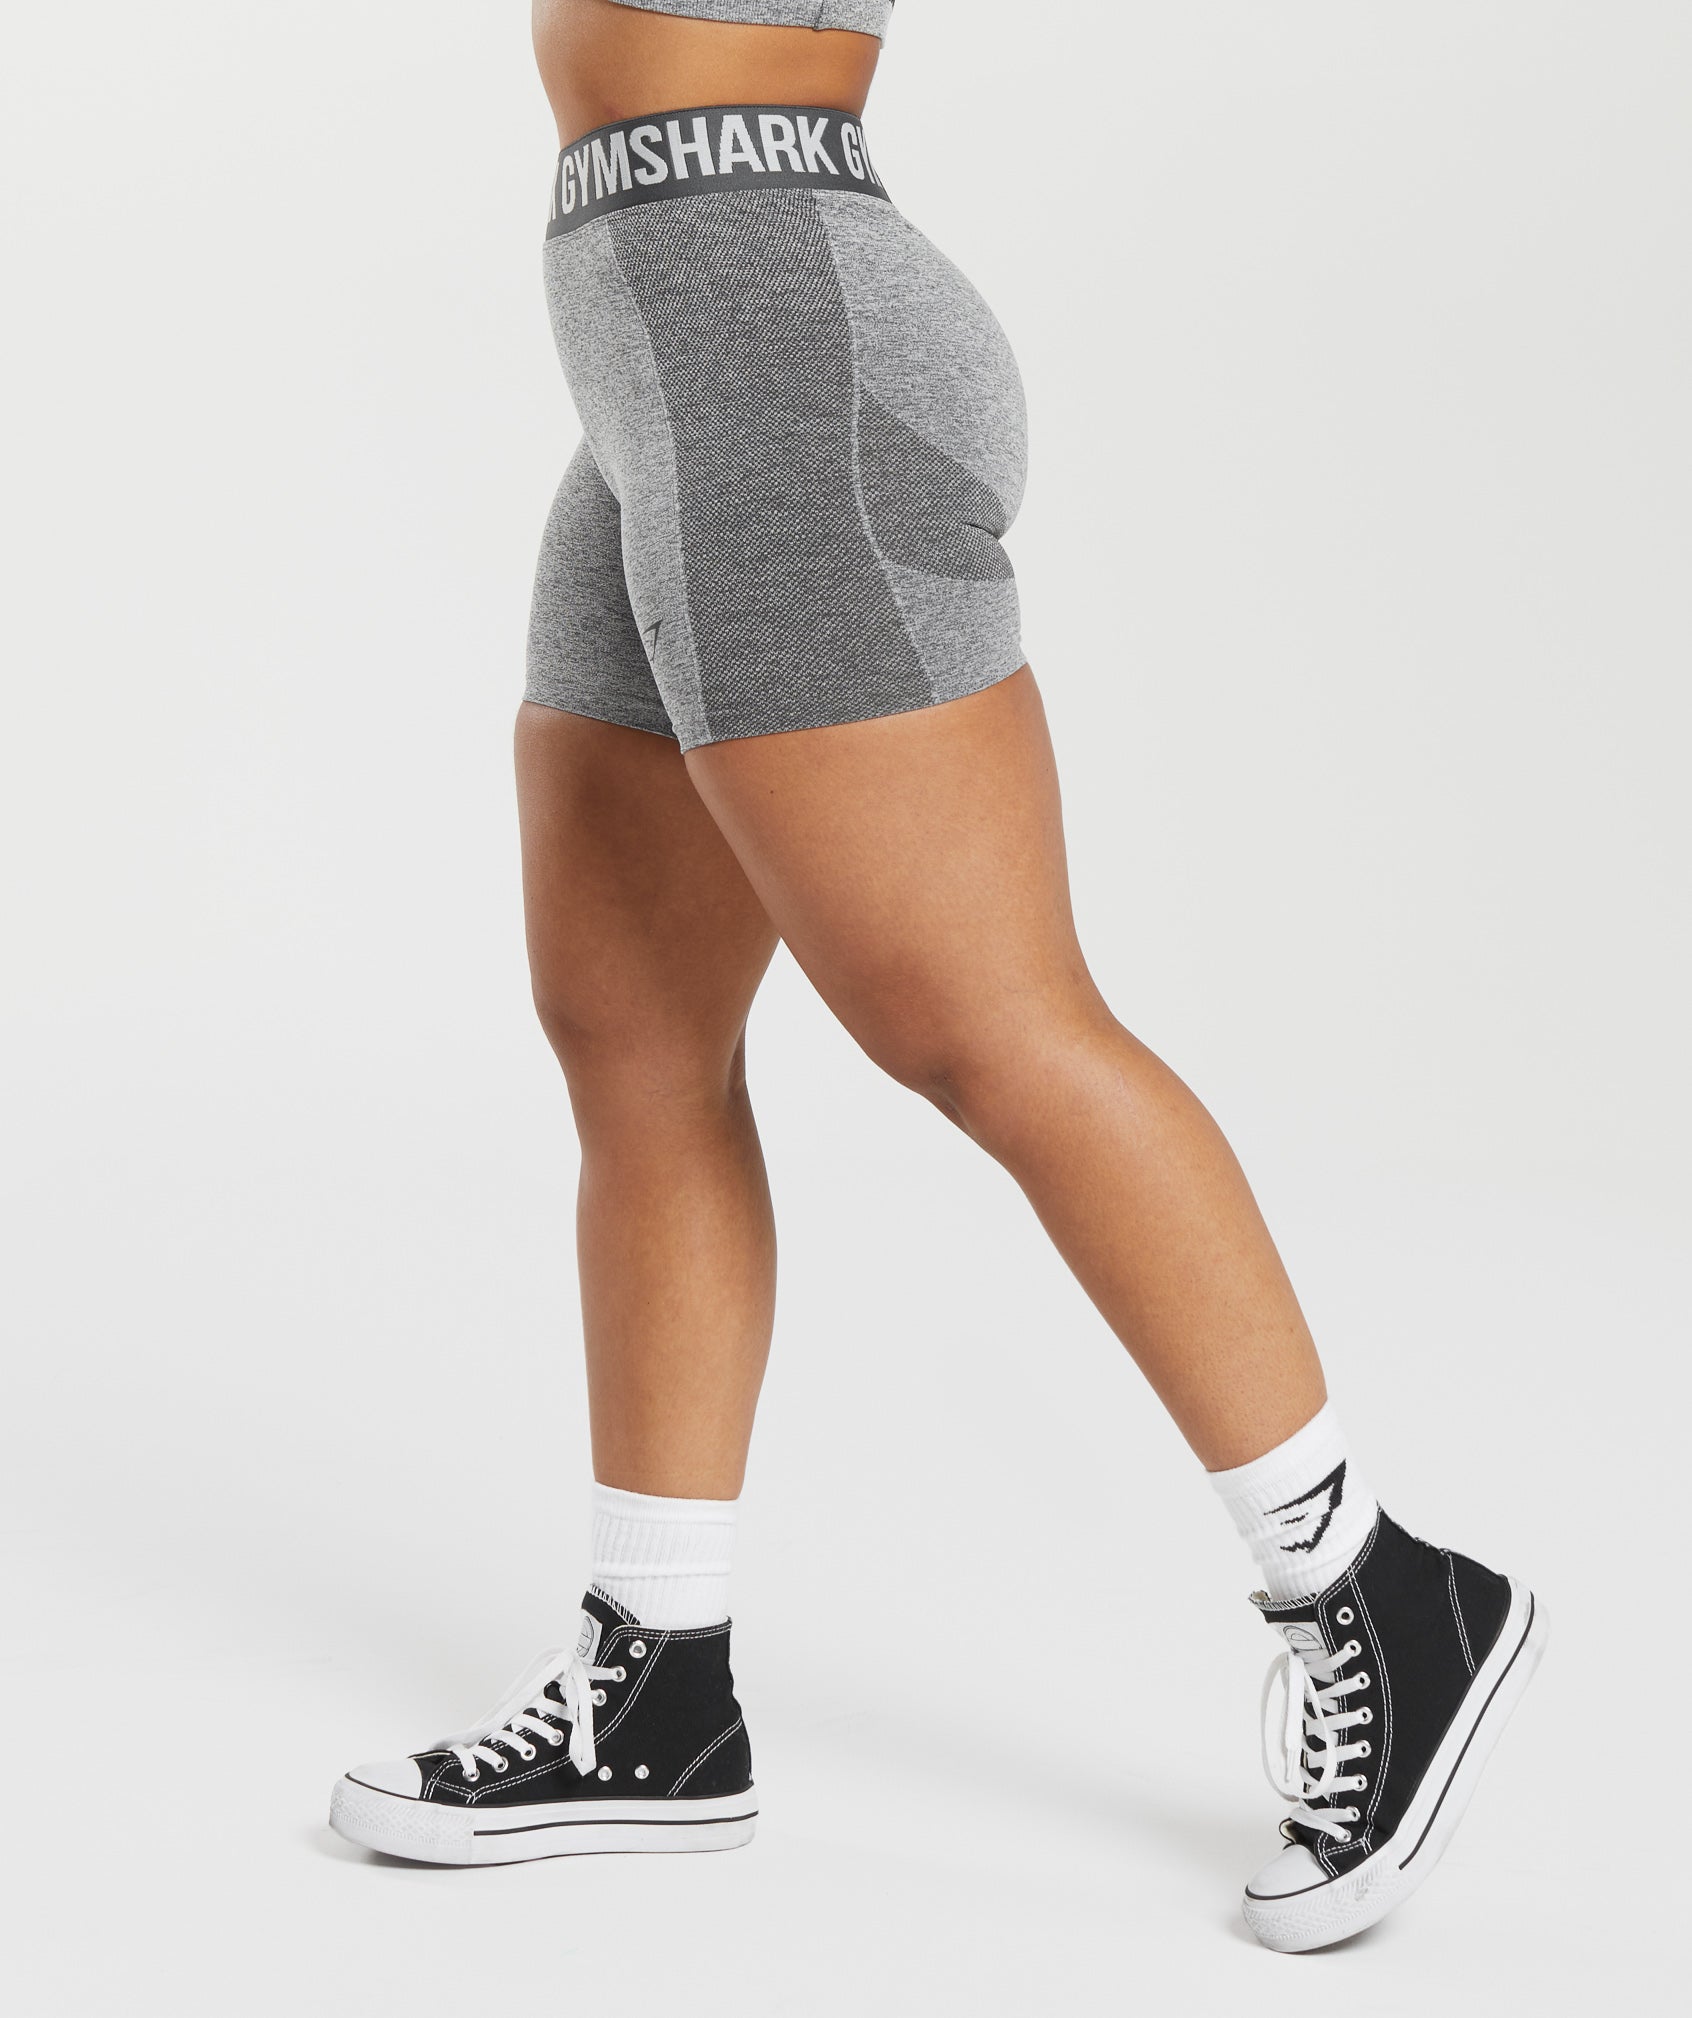 Flex Shorts in Charcoal Marl - view 3